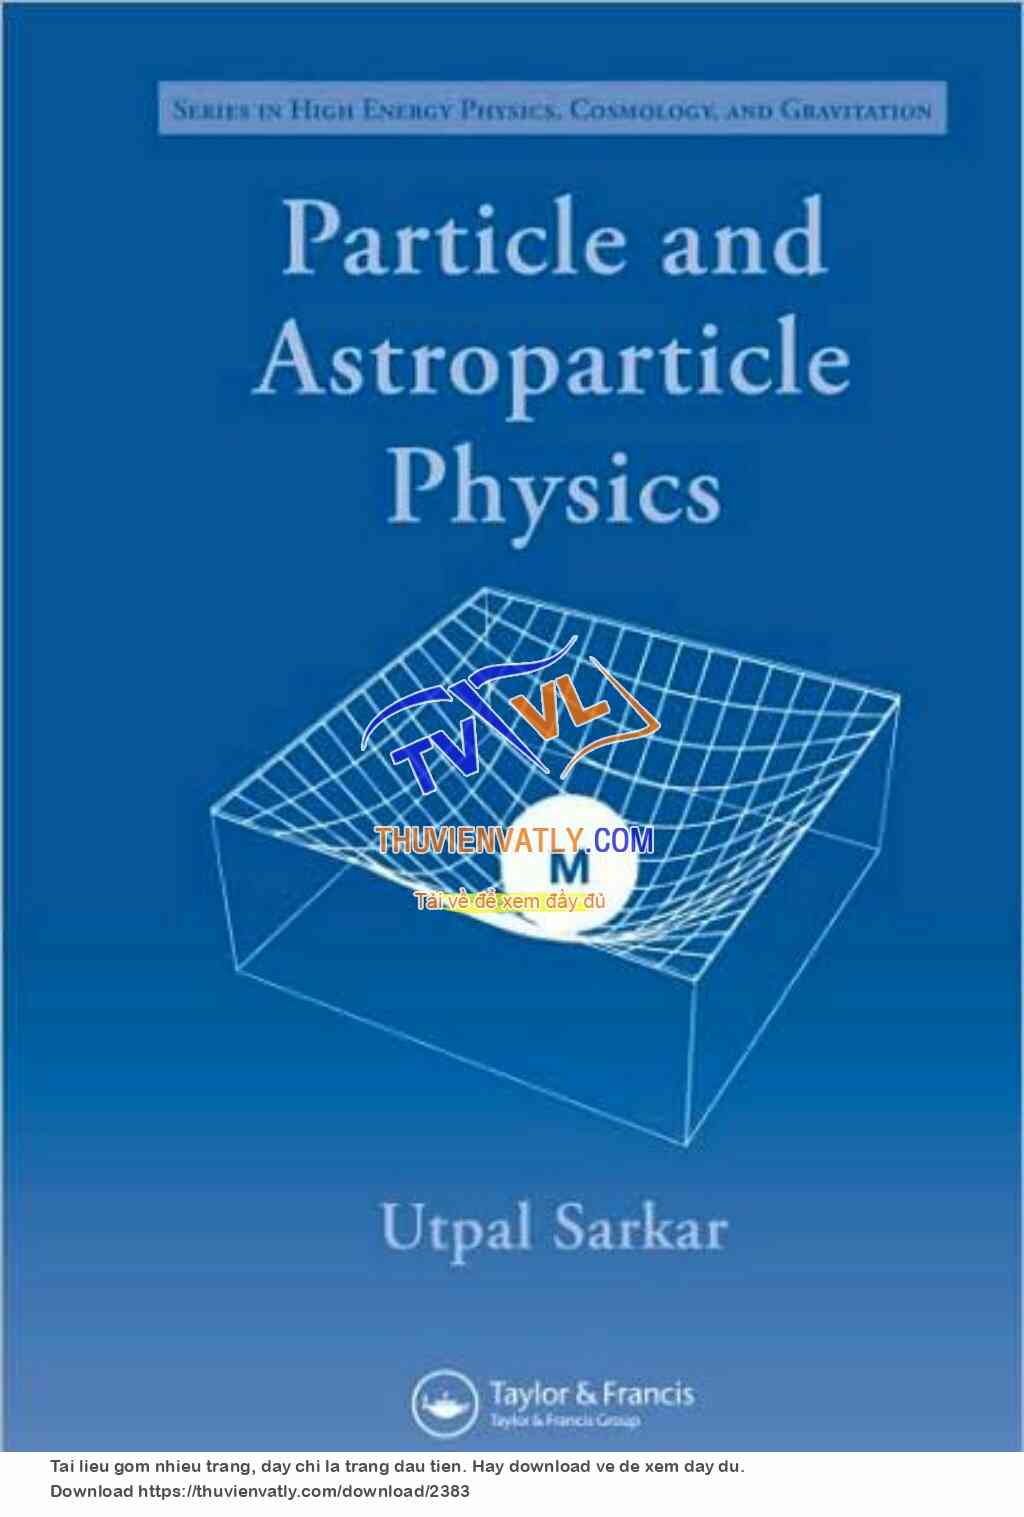 Particle and Astroparticle Physics (Utpal Sarkar)